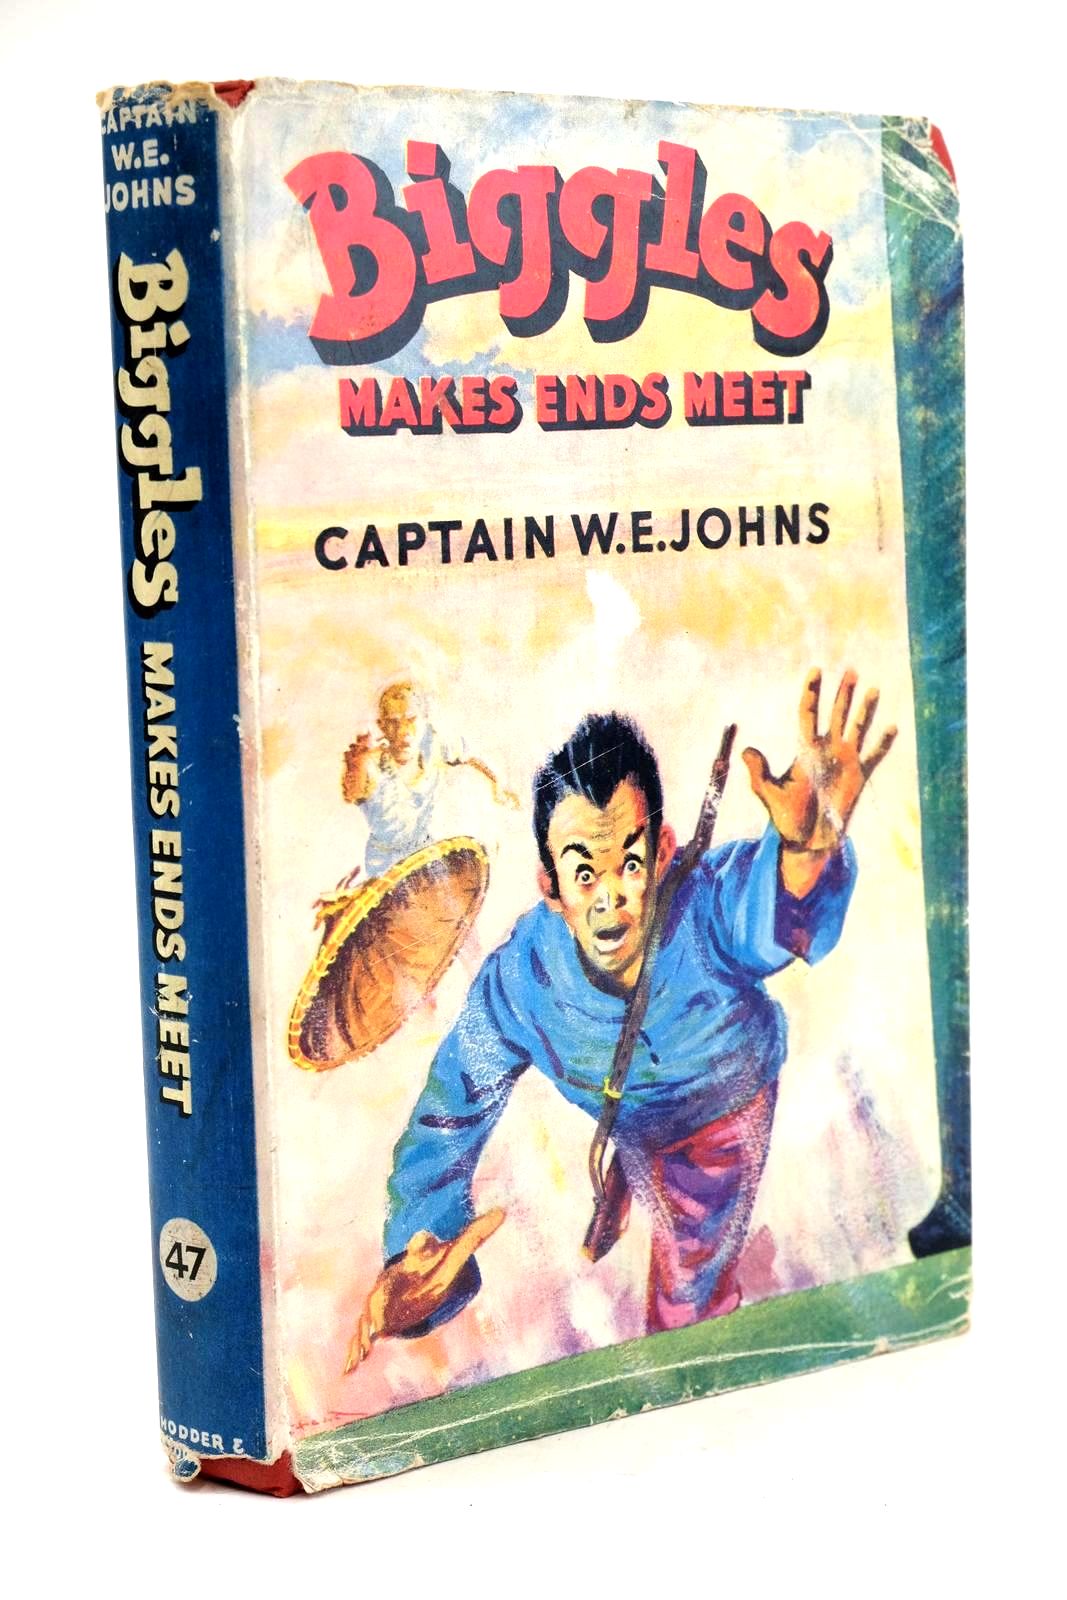 Photo of BIGGLES MAKES ENDS MEET written by Johns, W.E. illustrated by Stead, Leslie published by Hodder & Stoughton (STOCK CODE: 1324255)  for sale by Stella & Rose's Books